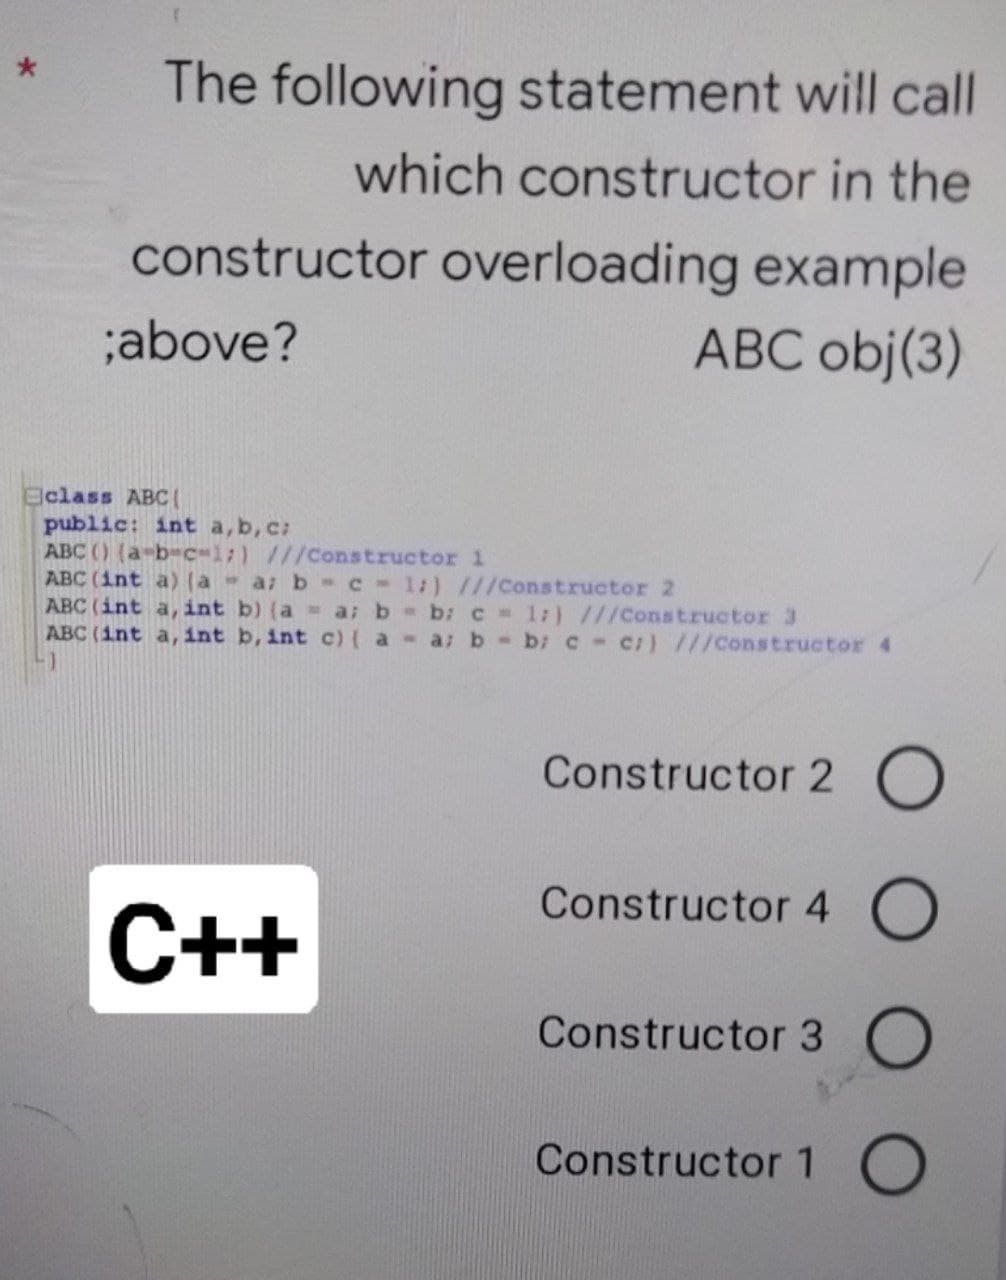 The following statement will call
which constructor in the
constructor overloading example
;above?
ABC obj(3)
Eclass ABC(
public: int a,b, c:
ABC () (a-b-c-1;) ///Constructor l
ABC (int a) (a a b -C 1:) ///Constructor 2
ABC (int a, int b) (a a: b b: C 1:) ///Constructor 3
ABC (int a, int b, int c){ a a: b-b: c-c/) ///Constructor 4
Constructor 2 0
Constructor 4 O
С++
Constructor 3
Constructor 1 O
